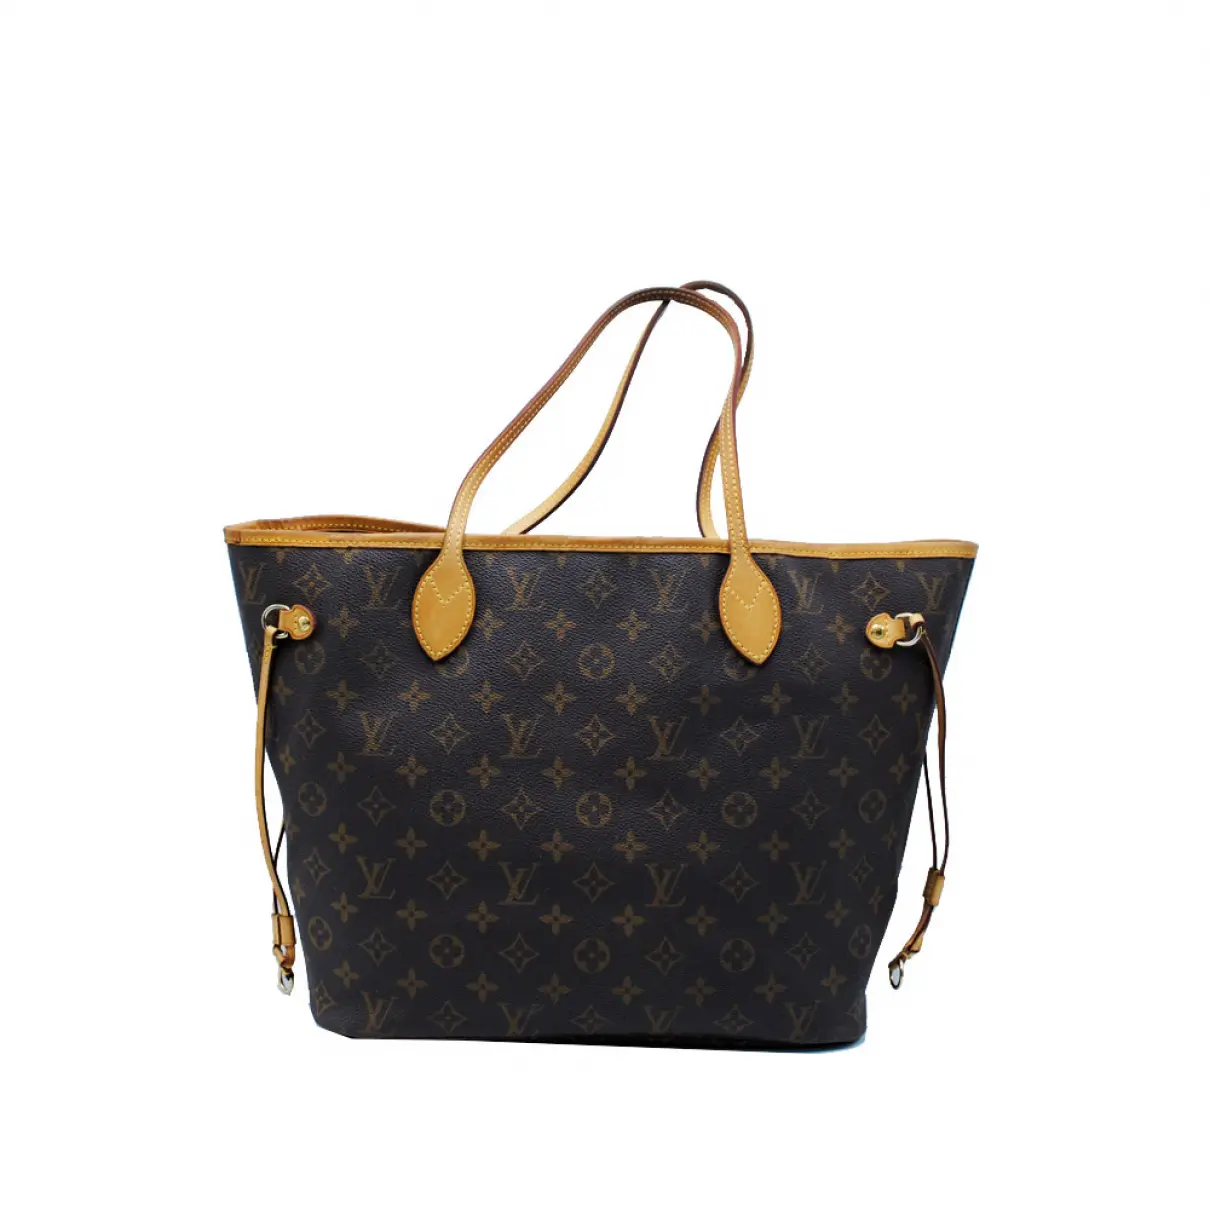 Buy Louis Vuitton Neverfull cloth tote online